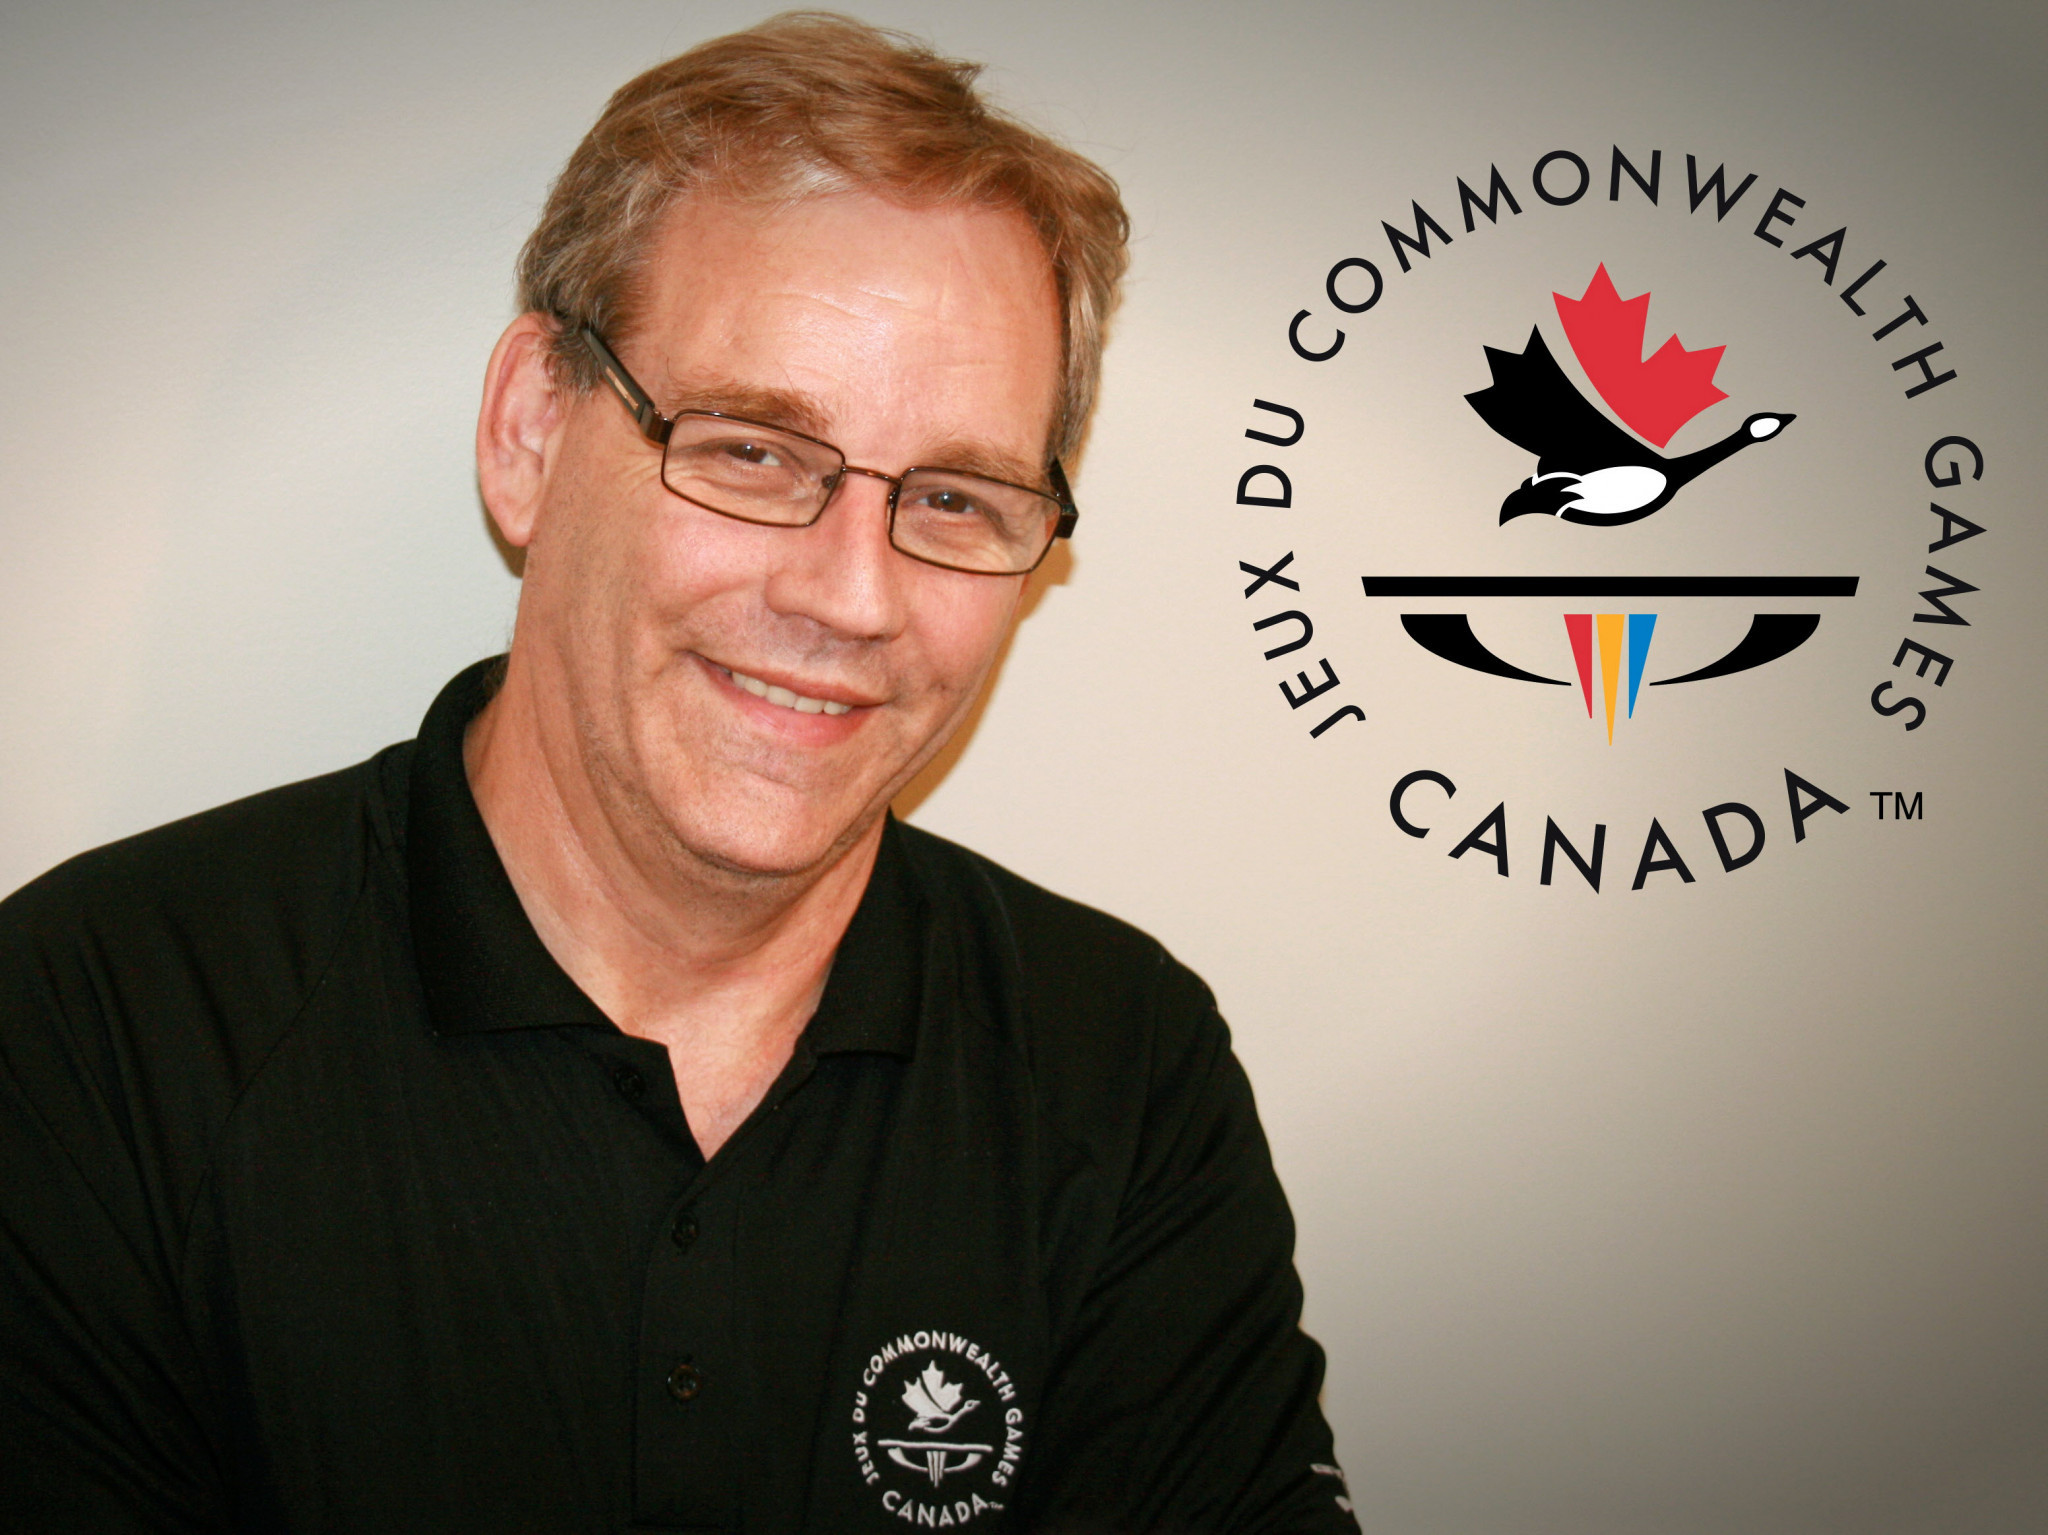 Commonwealth Games Canada Brian MacPherson plans to ask for his country to be awarded the centenary event of the Commonwealth Games in 2030 ©CGC